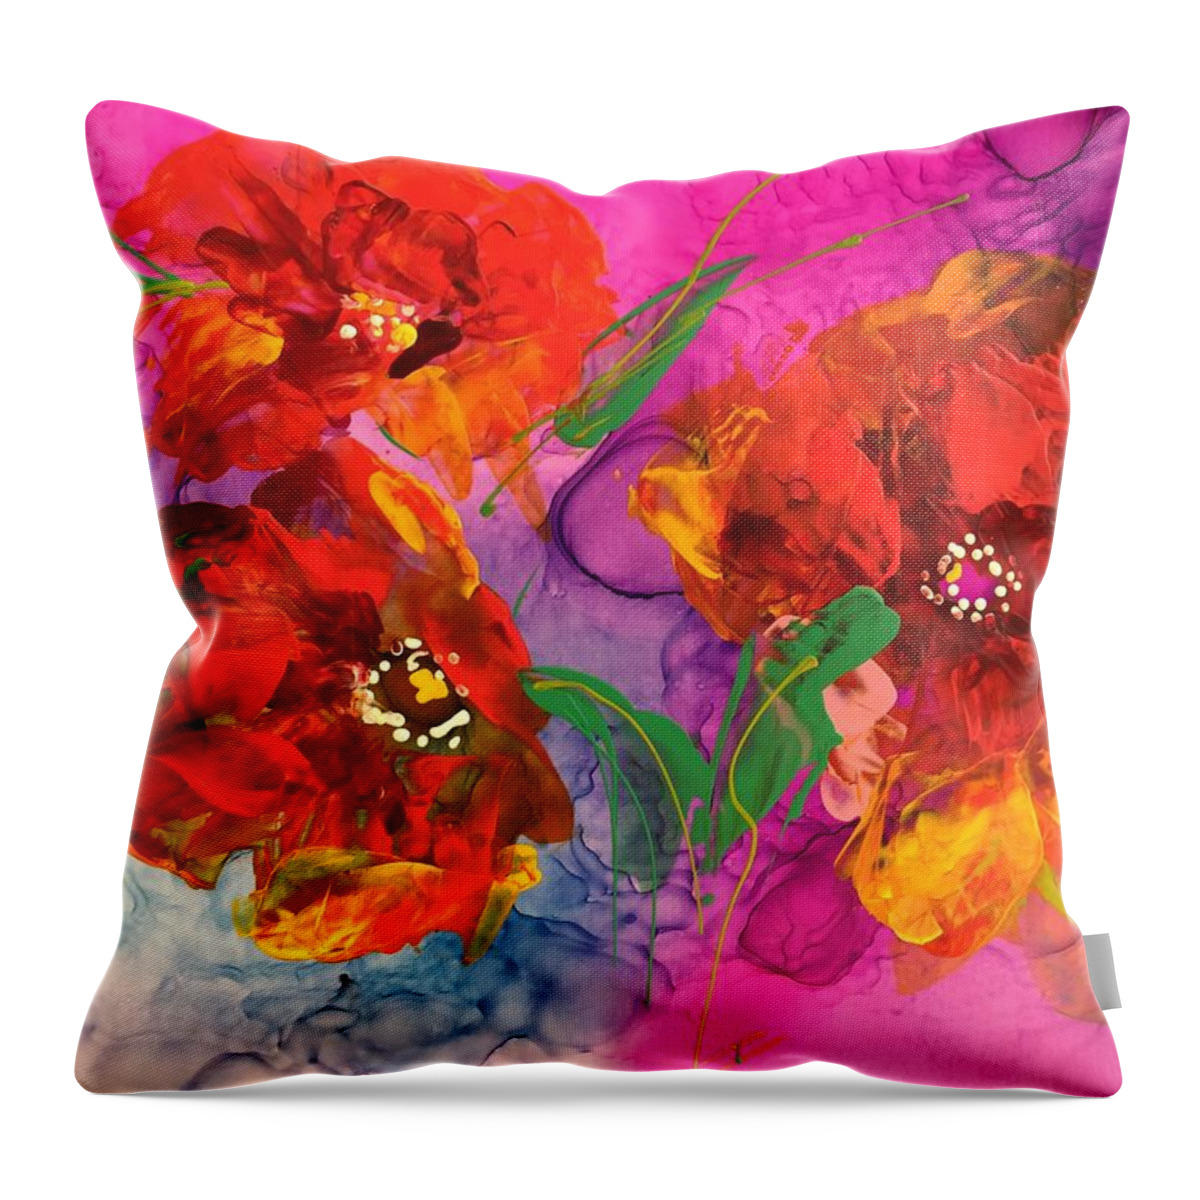 Abstract Throw Pillow featuring the painting Passionate Joy by Bonny Butler